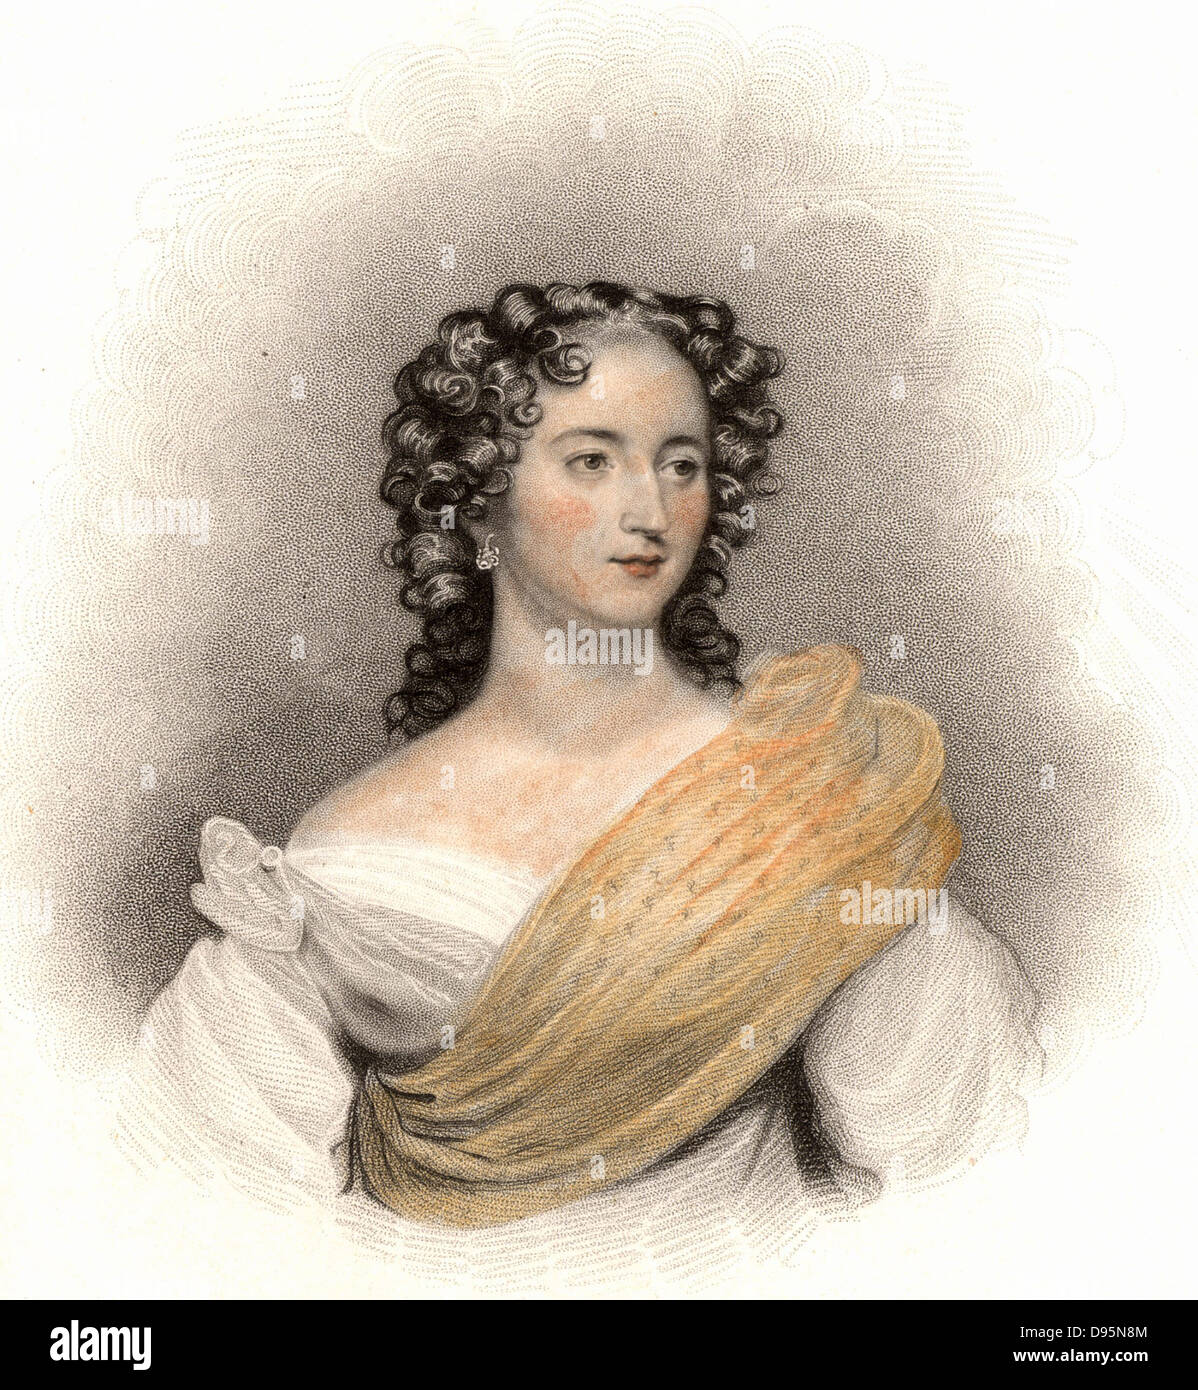 Harriet Constance Smithson (1800-1854) Irish actress. In 1827 she appeared in Paris as Ophelia 'Hamlet' and Juliet in 'Romeo and Juliet' when the French composer Hector Berlioz became enamoured of her. They married in 1833 and separated in 1841. Engraving Stock Photo